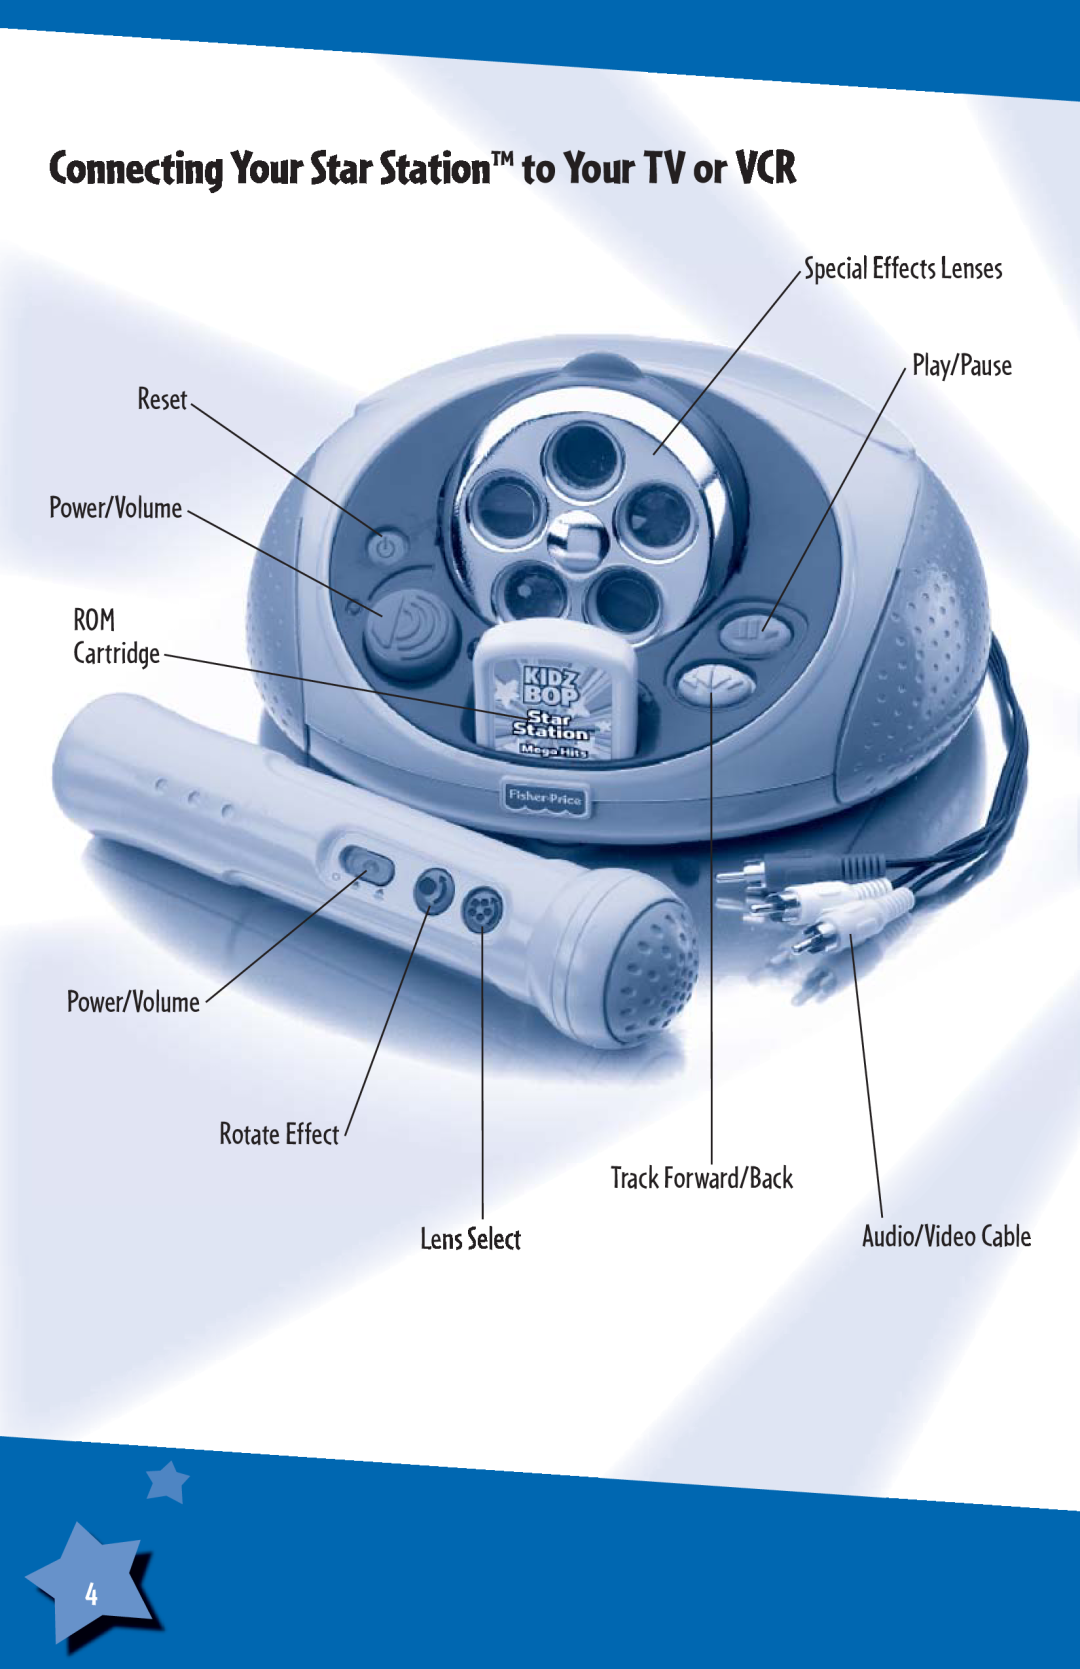 Fisher-Price H6723 Special Effects Lenses Play/Pause Reset, Power/Volume ROM Cartridge Power/Volume, Lens Select 